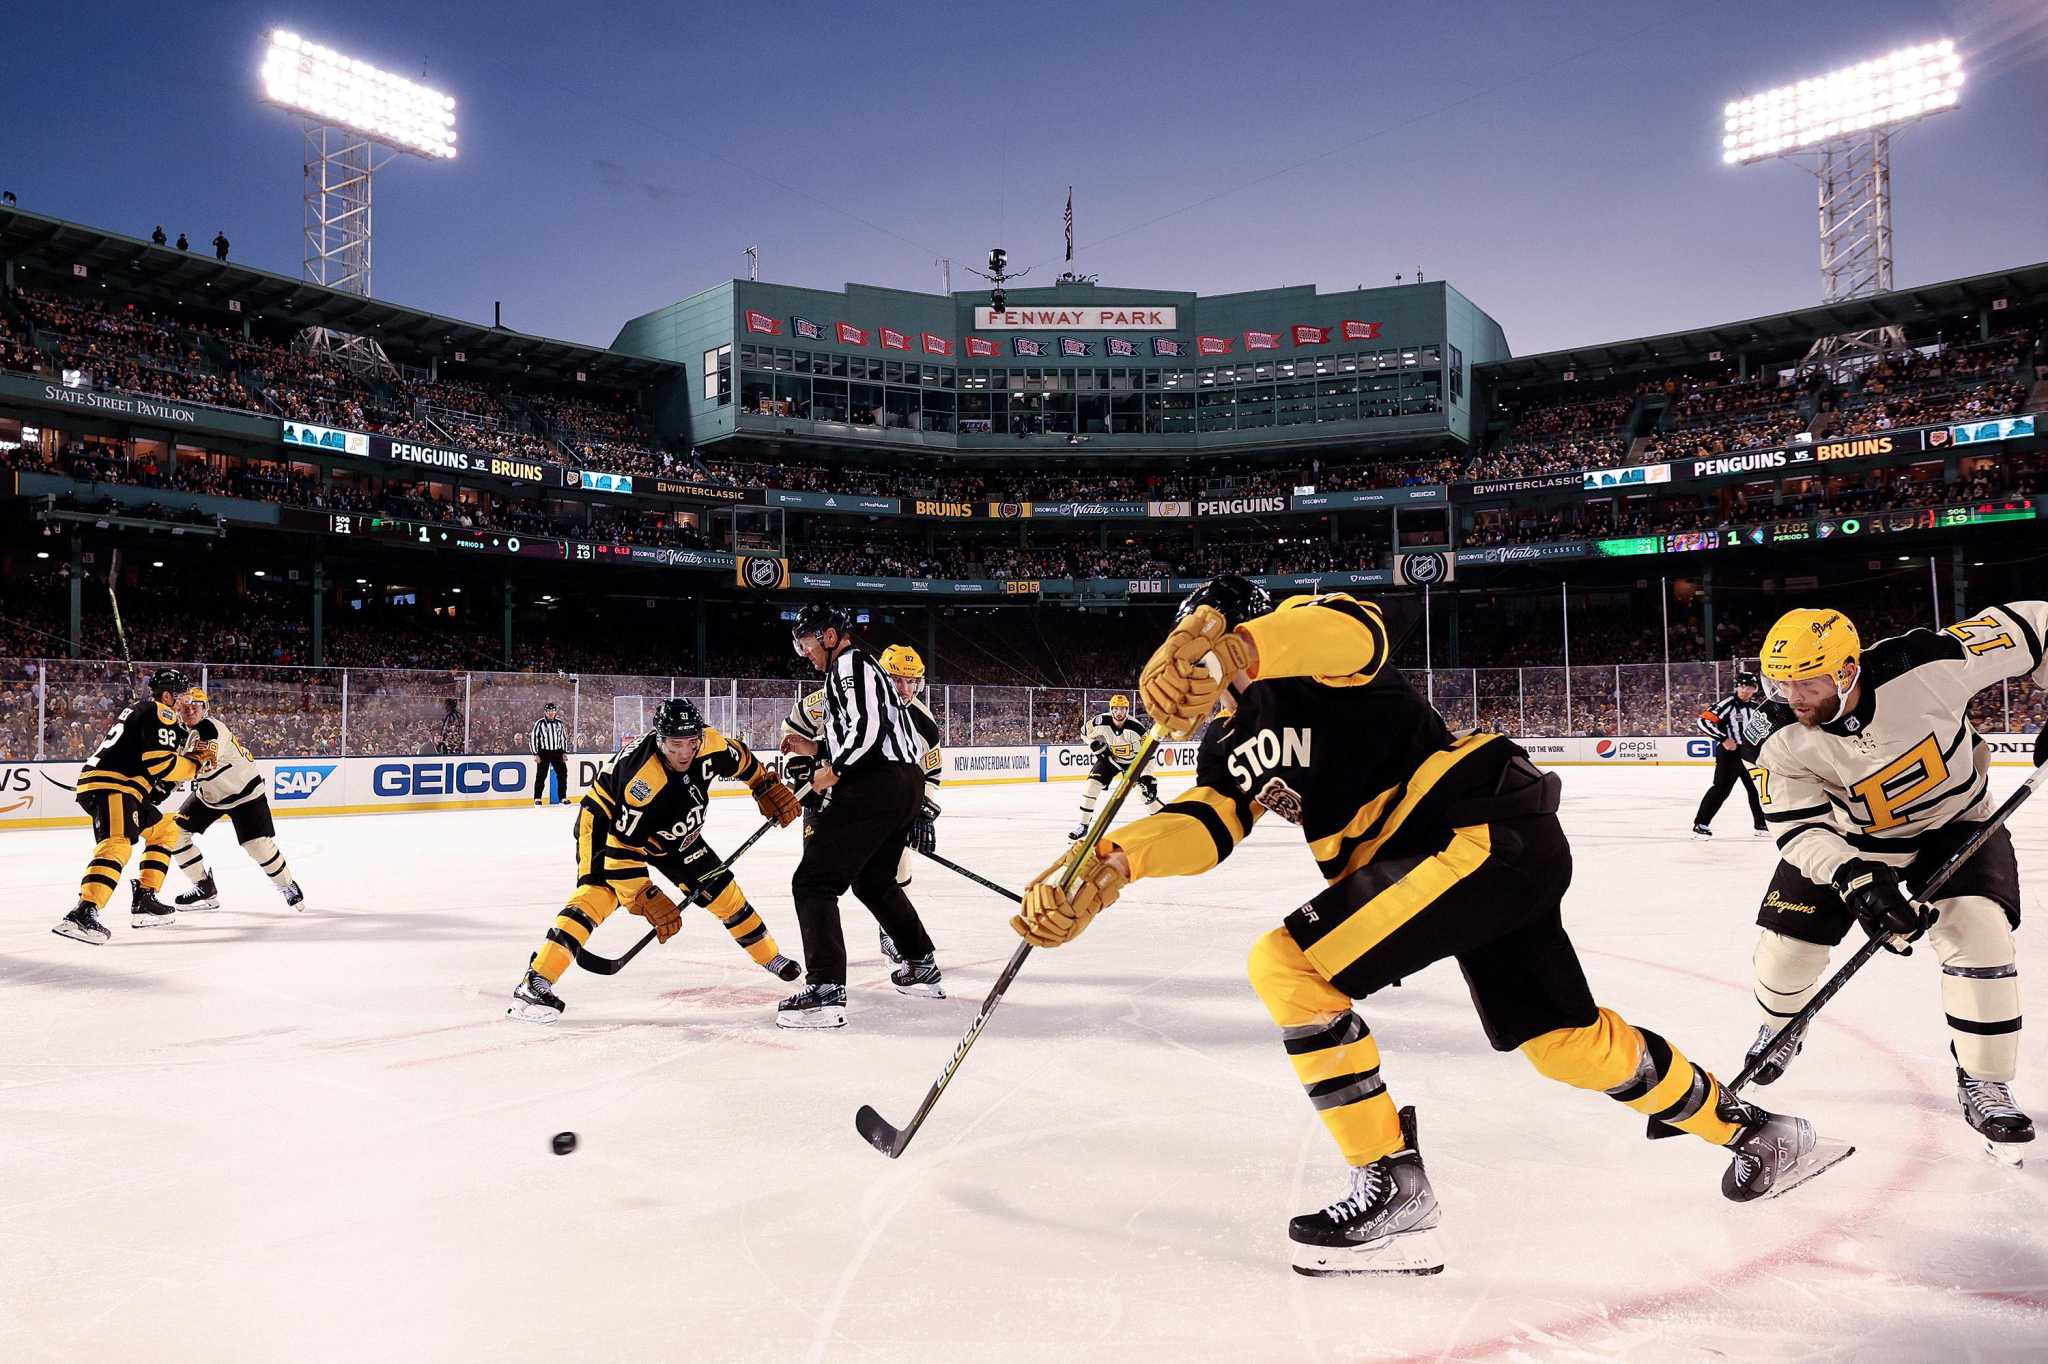 NHL roundup: DeBrusk leads Bruins past Penguins in Winter Classic